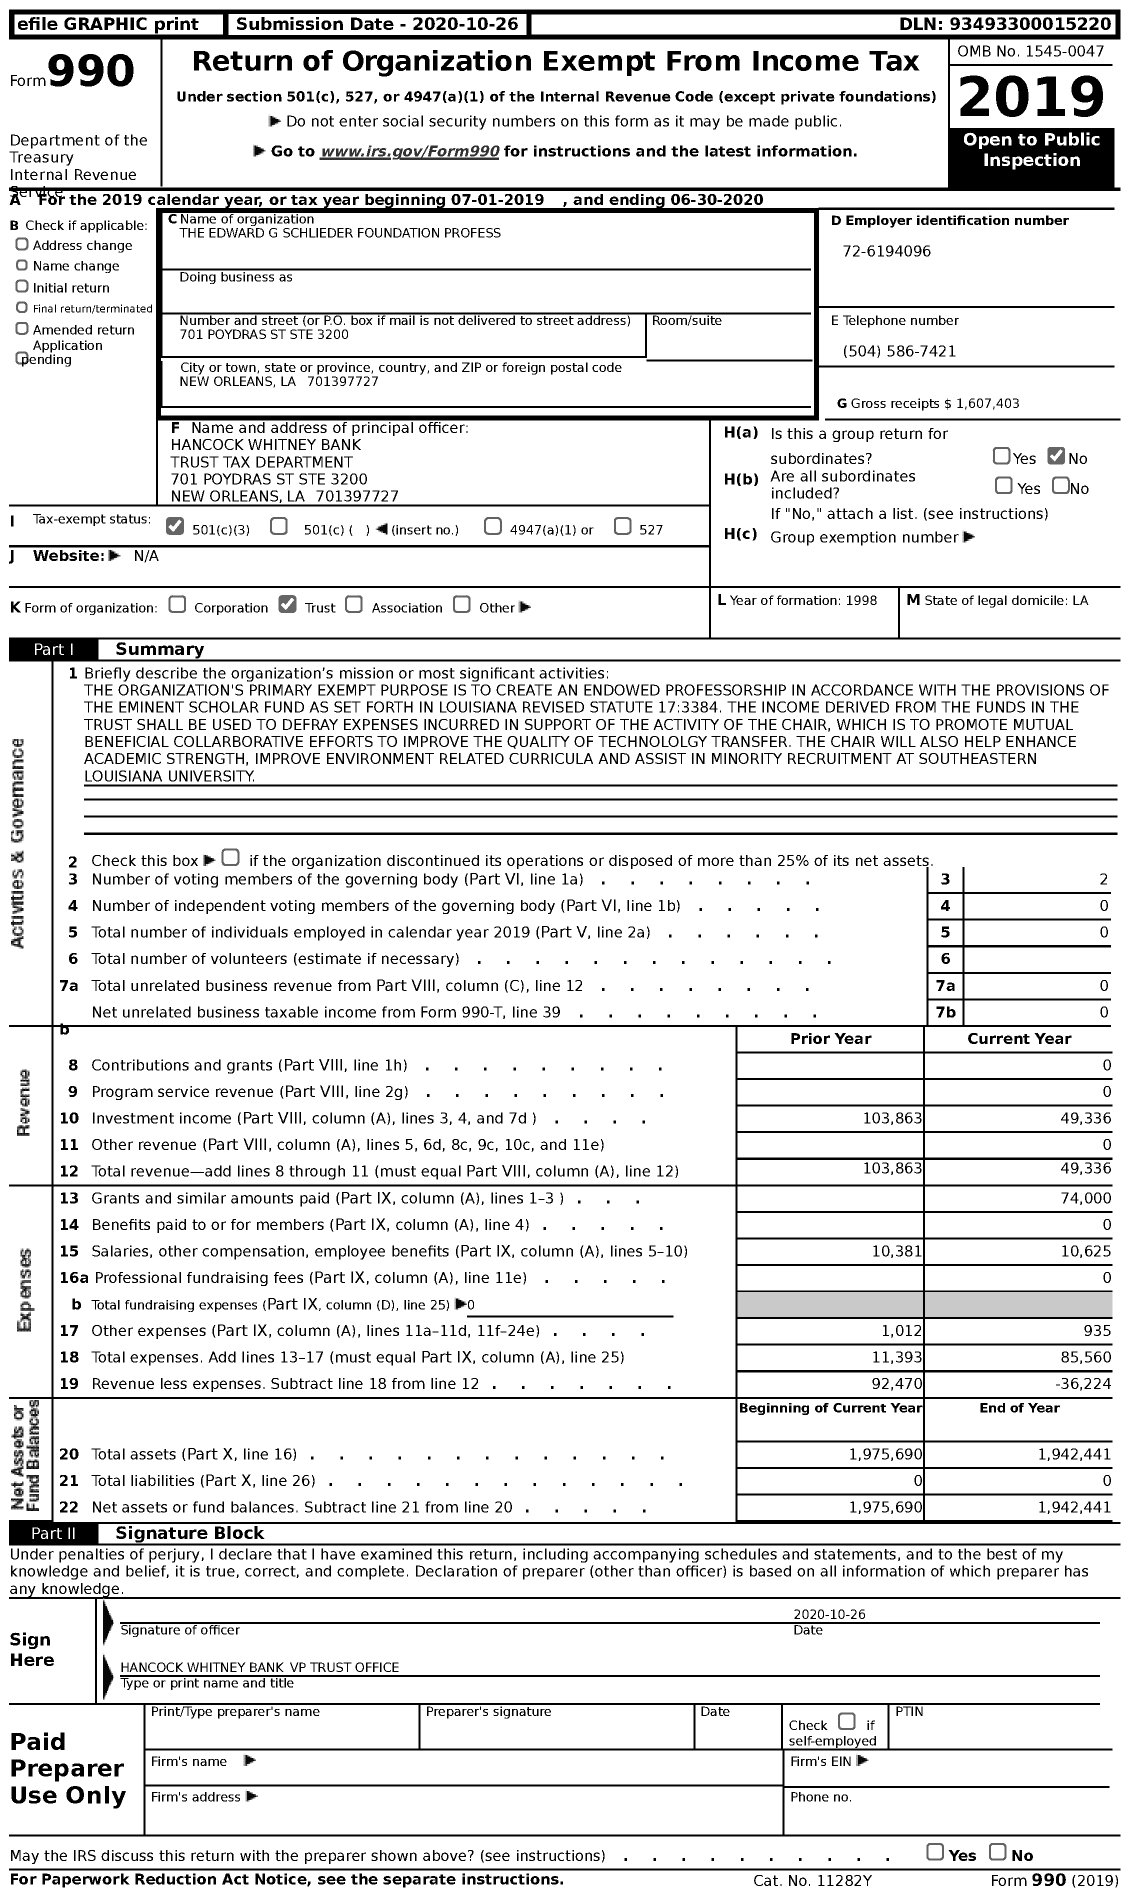 Image of first page of 2019 Form 990 for The Edward G Schlieder Foundation Profess